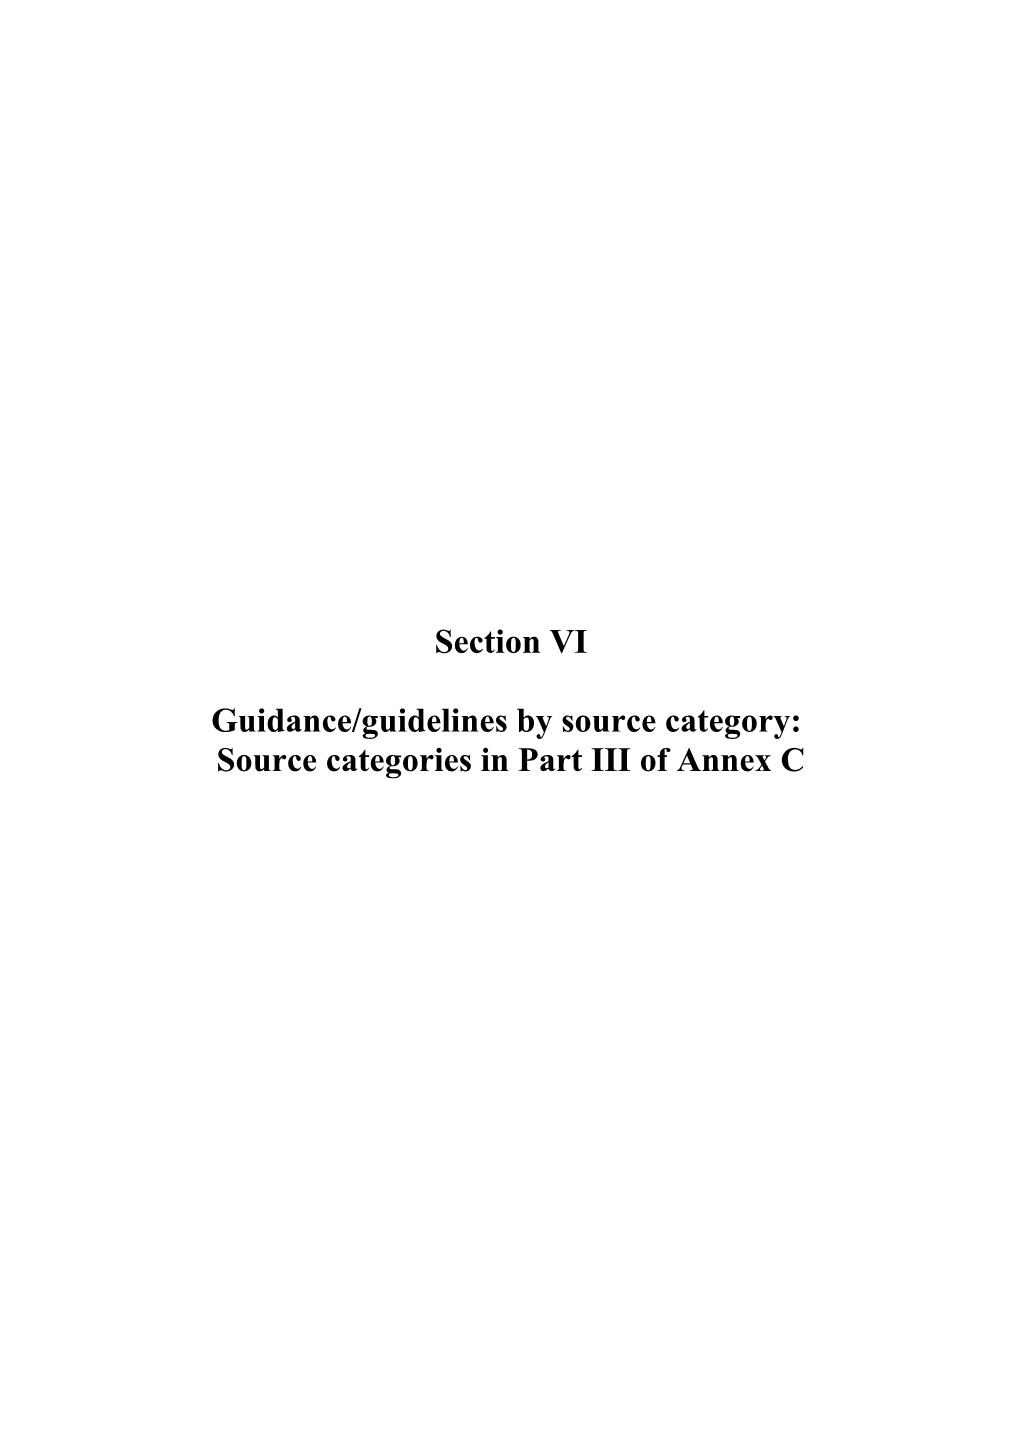 SECTION VI. Guidelines / Guidance by Source Category: Part III of Annex C